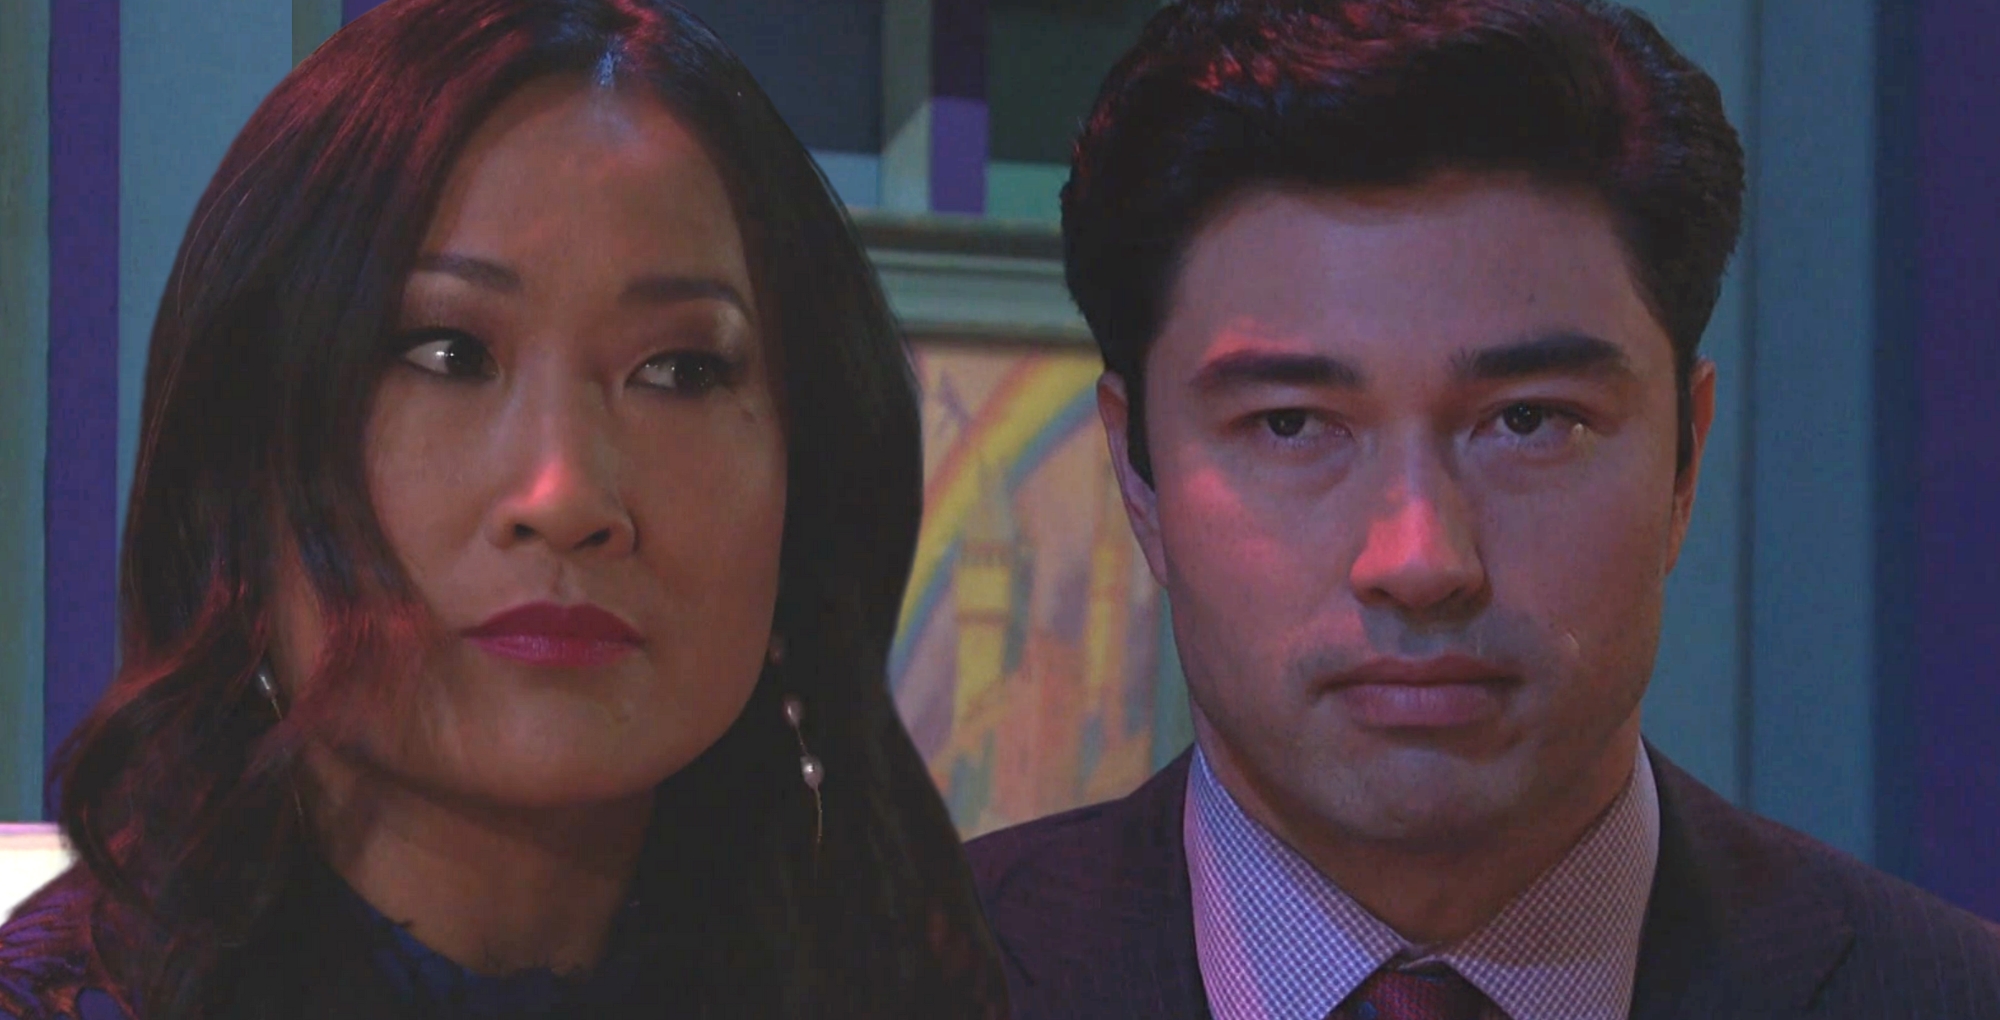 days of our lives melinda trask went on a date with li shin.